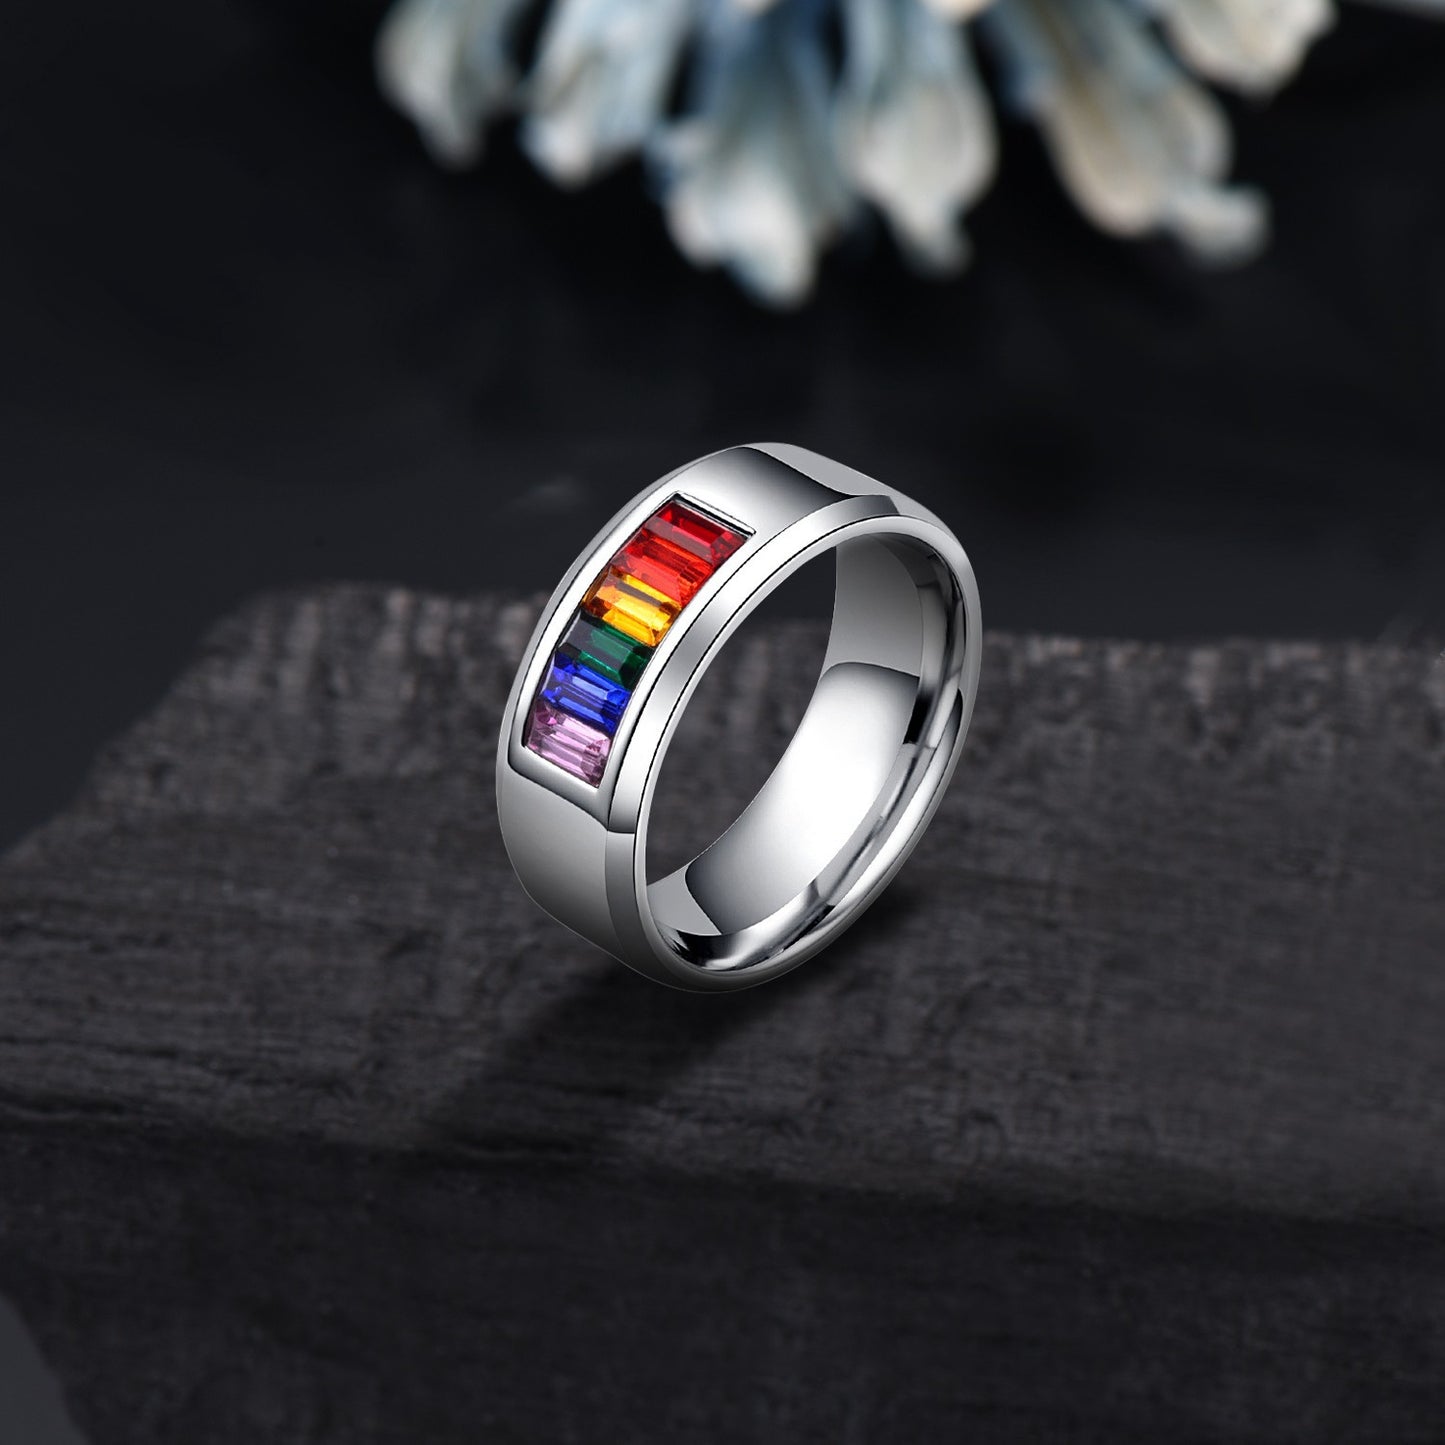 14K White Gold Genuine Multi-Gemstone Rainbow Anniversary Promise Band LGBT Engagement Ring Best Friend Gift Colors Of My Pride Gay Pride Ring